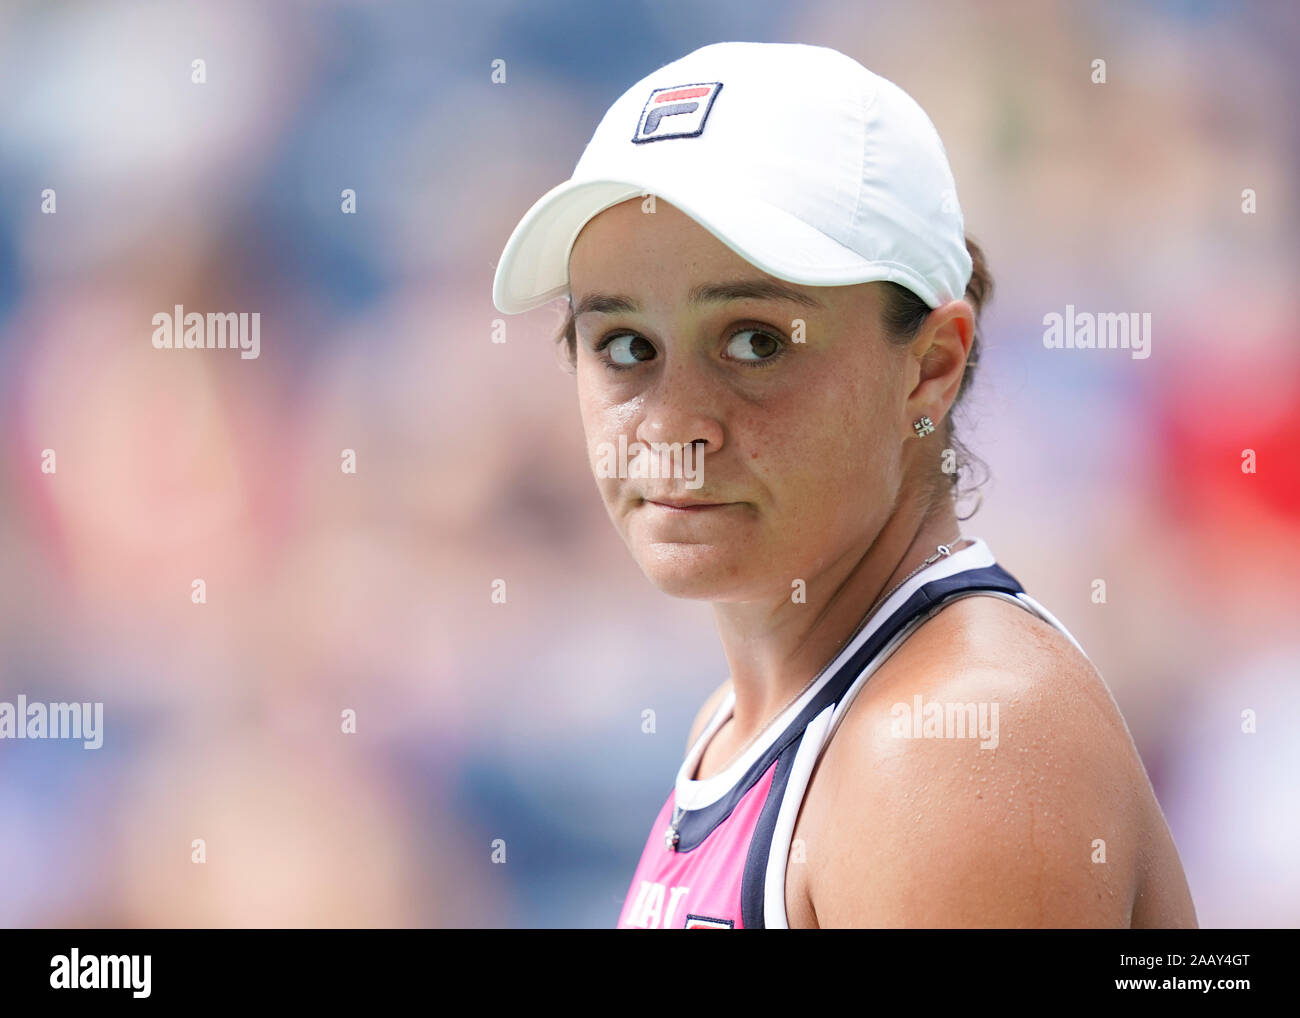 Close-up  portrait of Australian tennis player Ashleigh Barty during US Open tennis tournament, New York City, New York State, USA Stock Photo